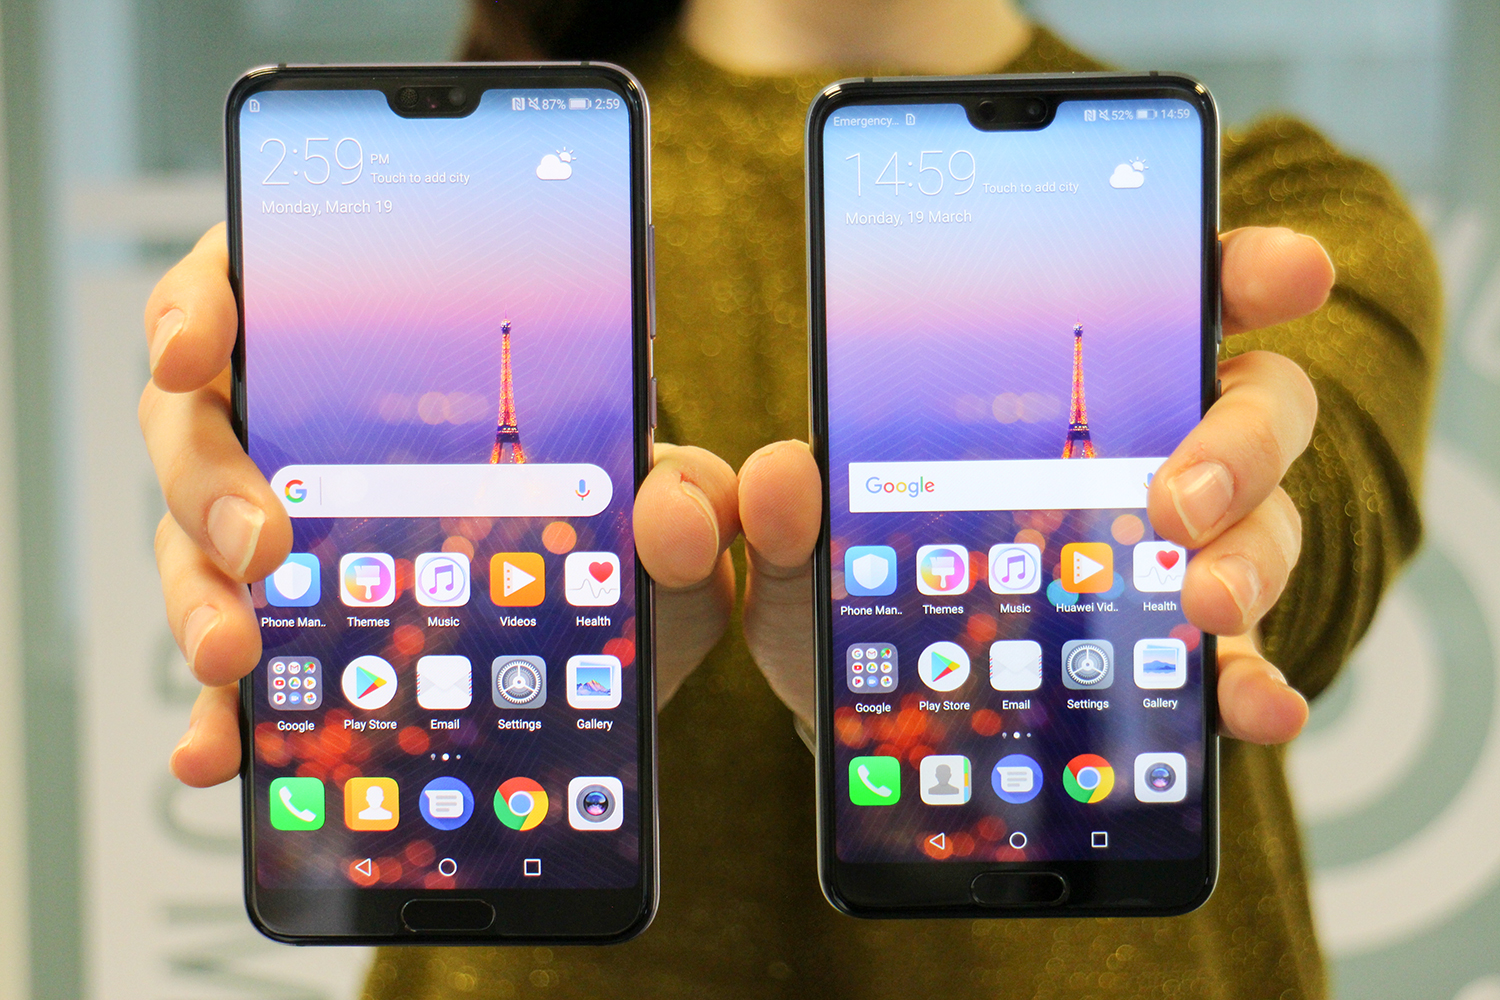 Scorch Memo Centimeter Master Your Huawei P20 and P20 Pro With These Helpful Tips and Tricks |  Digital Trends